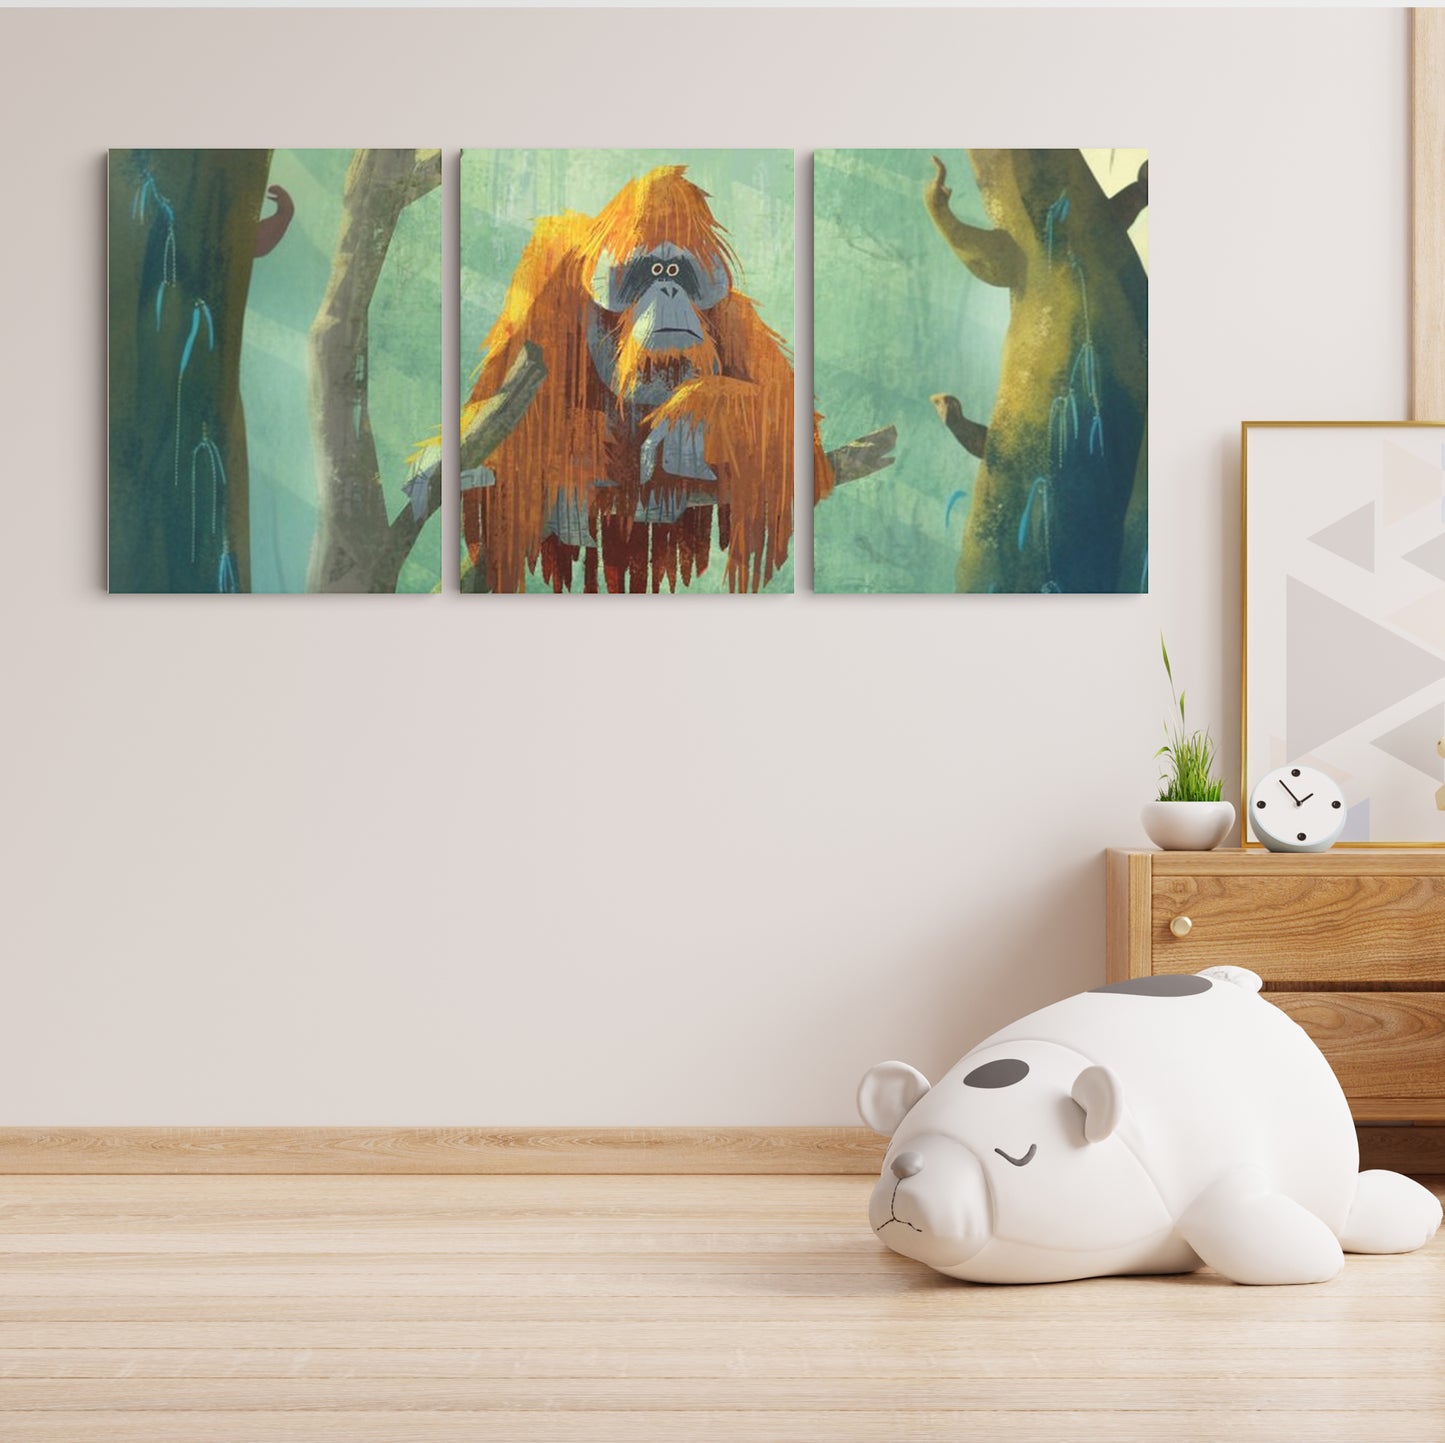 Wild Serenity: A Wall Art Immersing You in an Orangutan's World Within the Forest - Embrace the Tranquility of Primal Beauty - S05E66